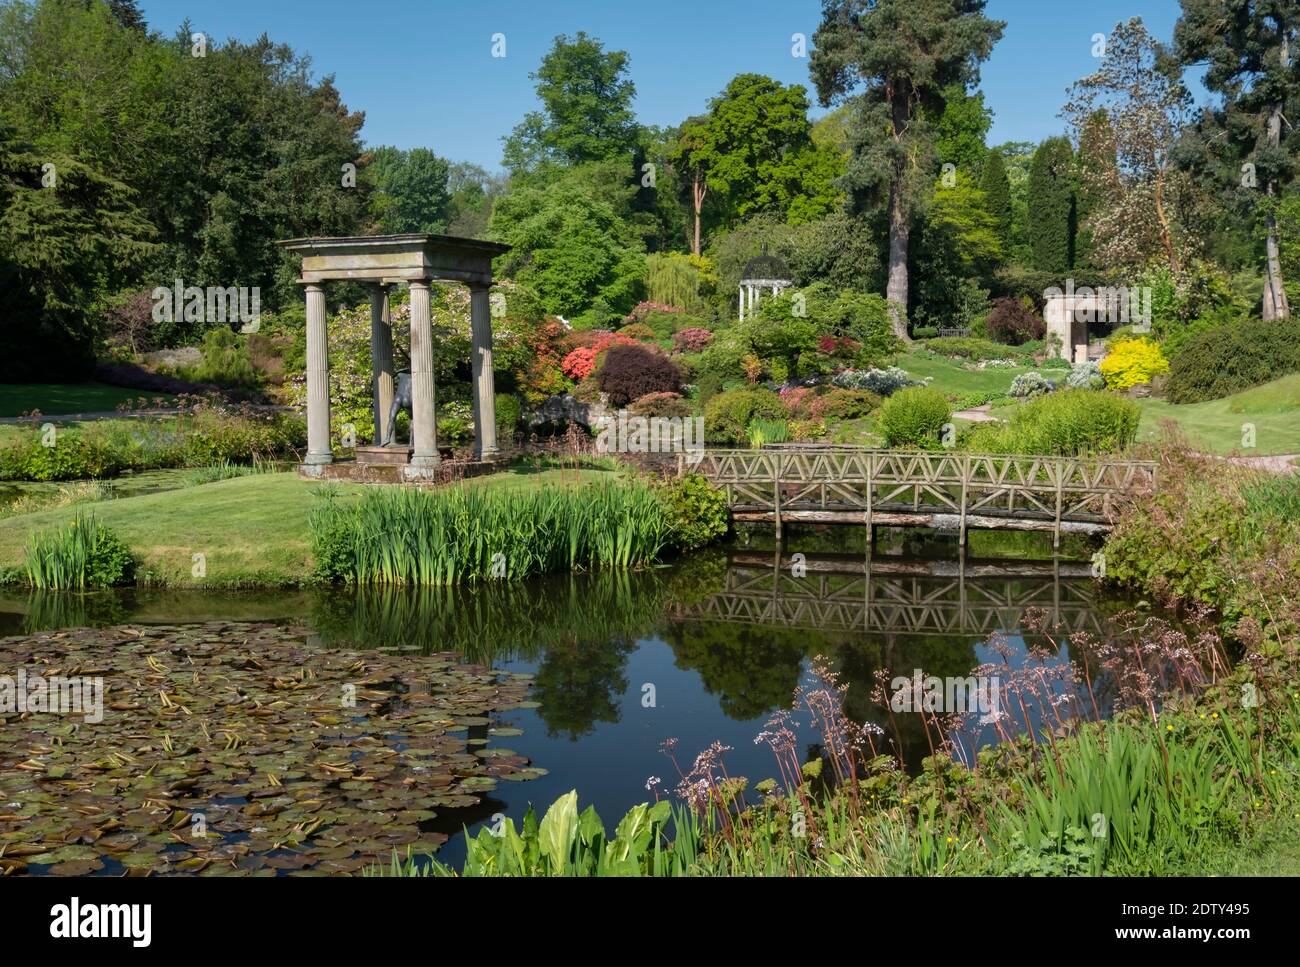 The Temple Garden in spring, Cholmondeley Castle, Cholmondeley, Cheshire, England, UK Stock Photo